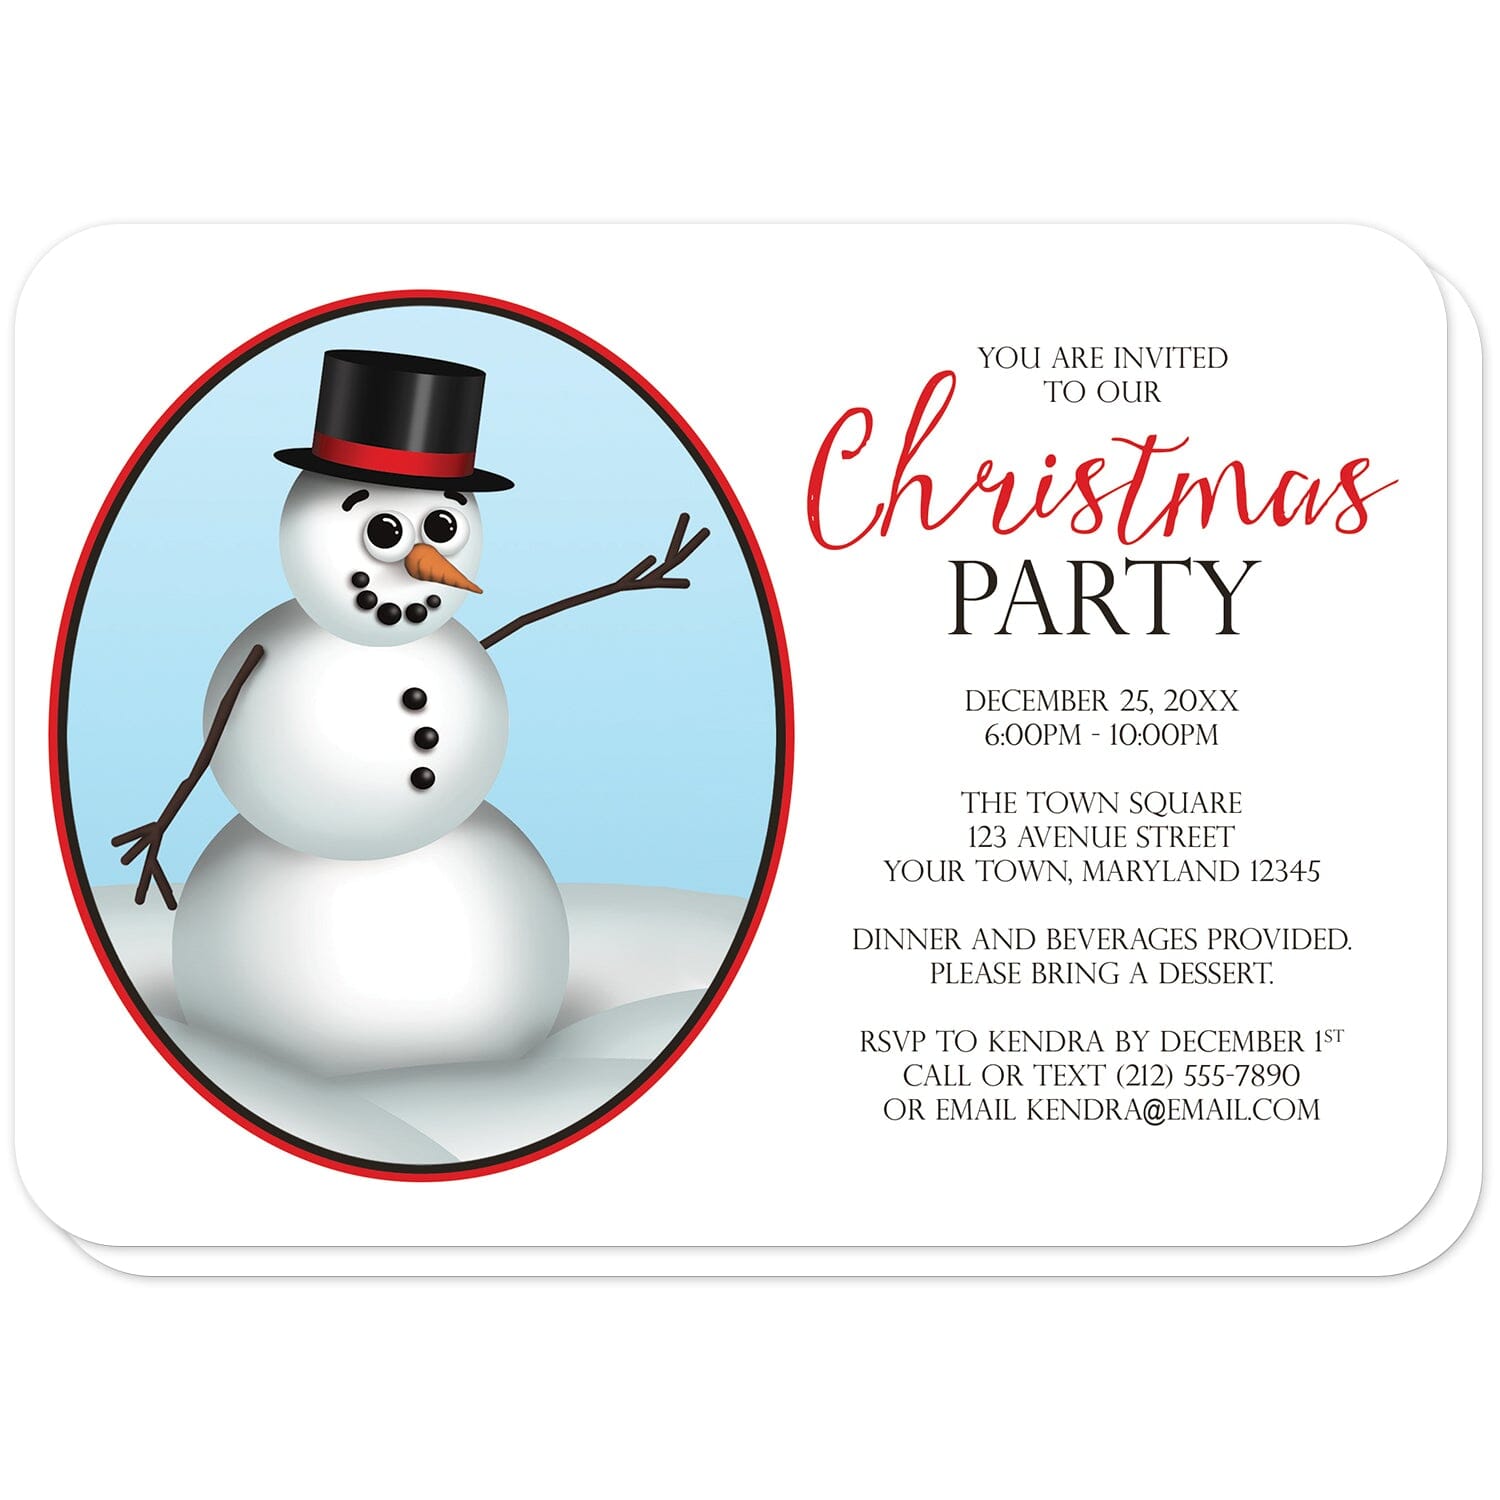 Cute and Classy Snowman Christmas Party Invitations (with rounded corners) at Artistically Invited. Cute and classy snowman Christmas party invitations in a modern design with an illustration of a cute and classy snowman wearing a black top hat with a red stripe. These invitations are designed for your winter Christmas party, holiday party, or office party celebration.